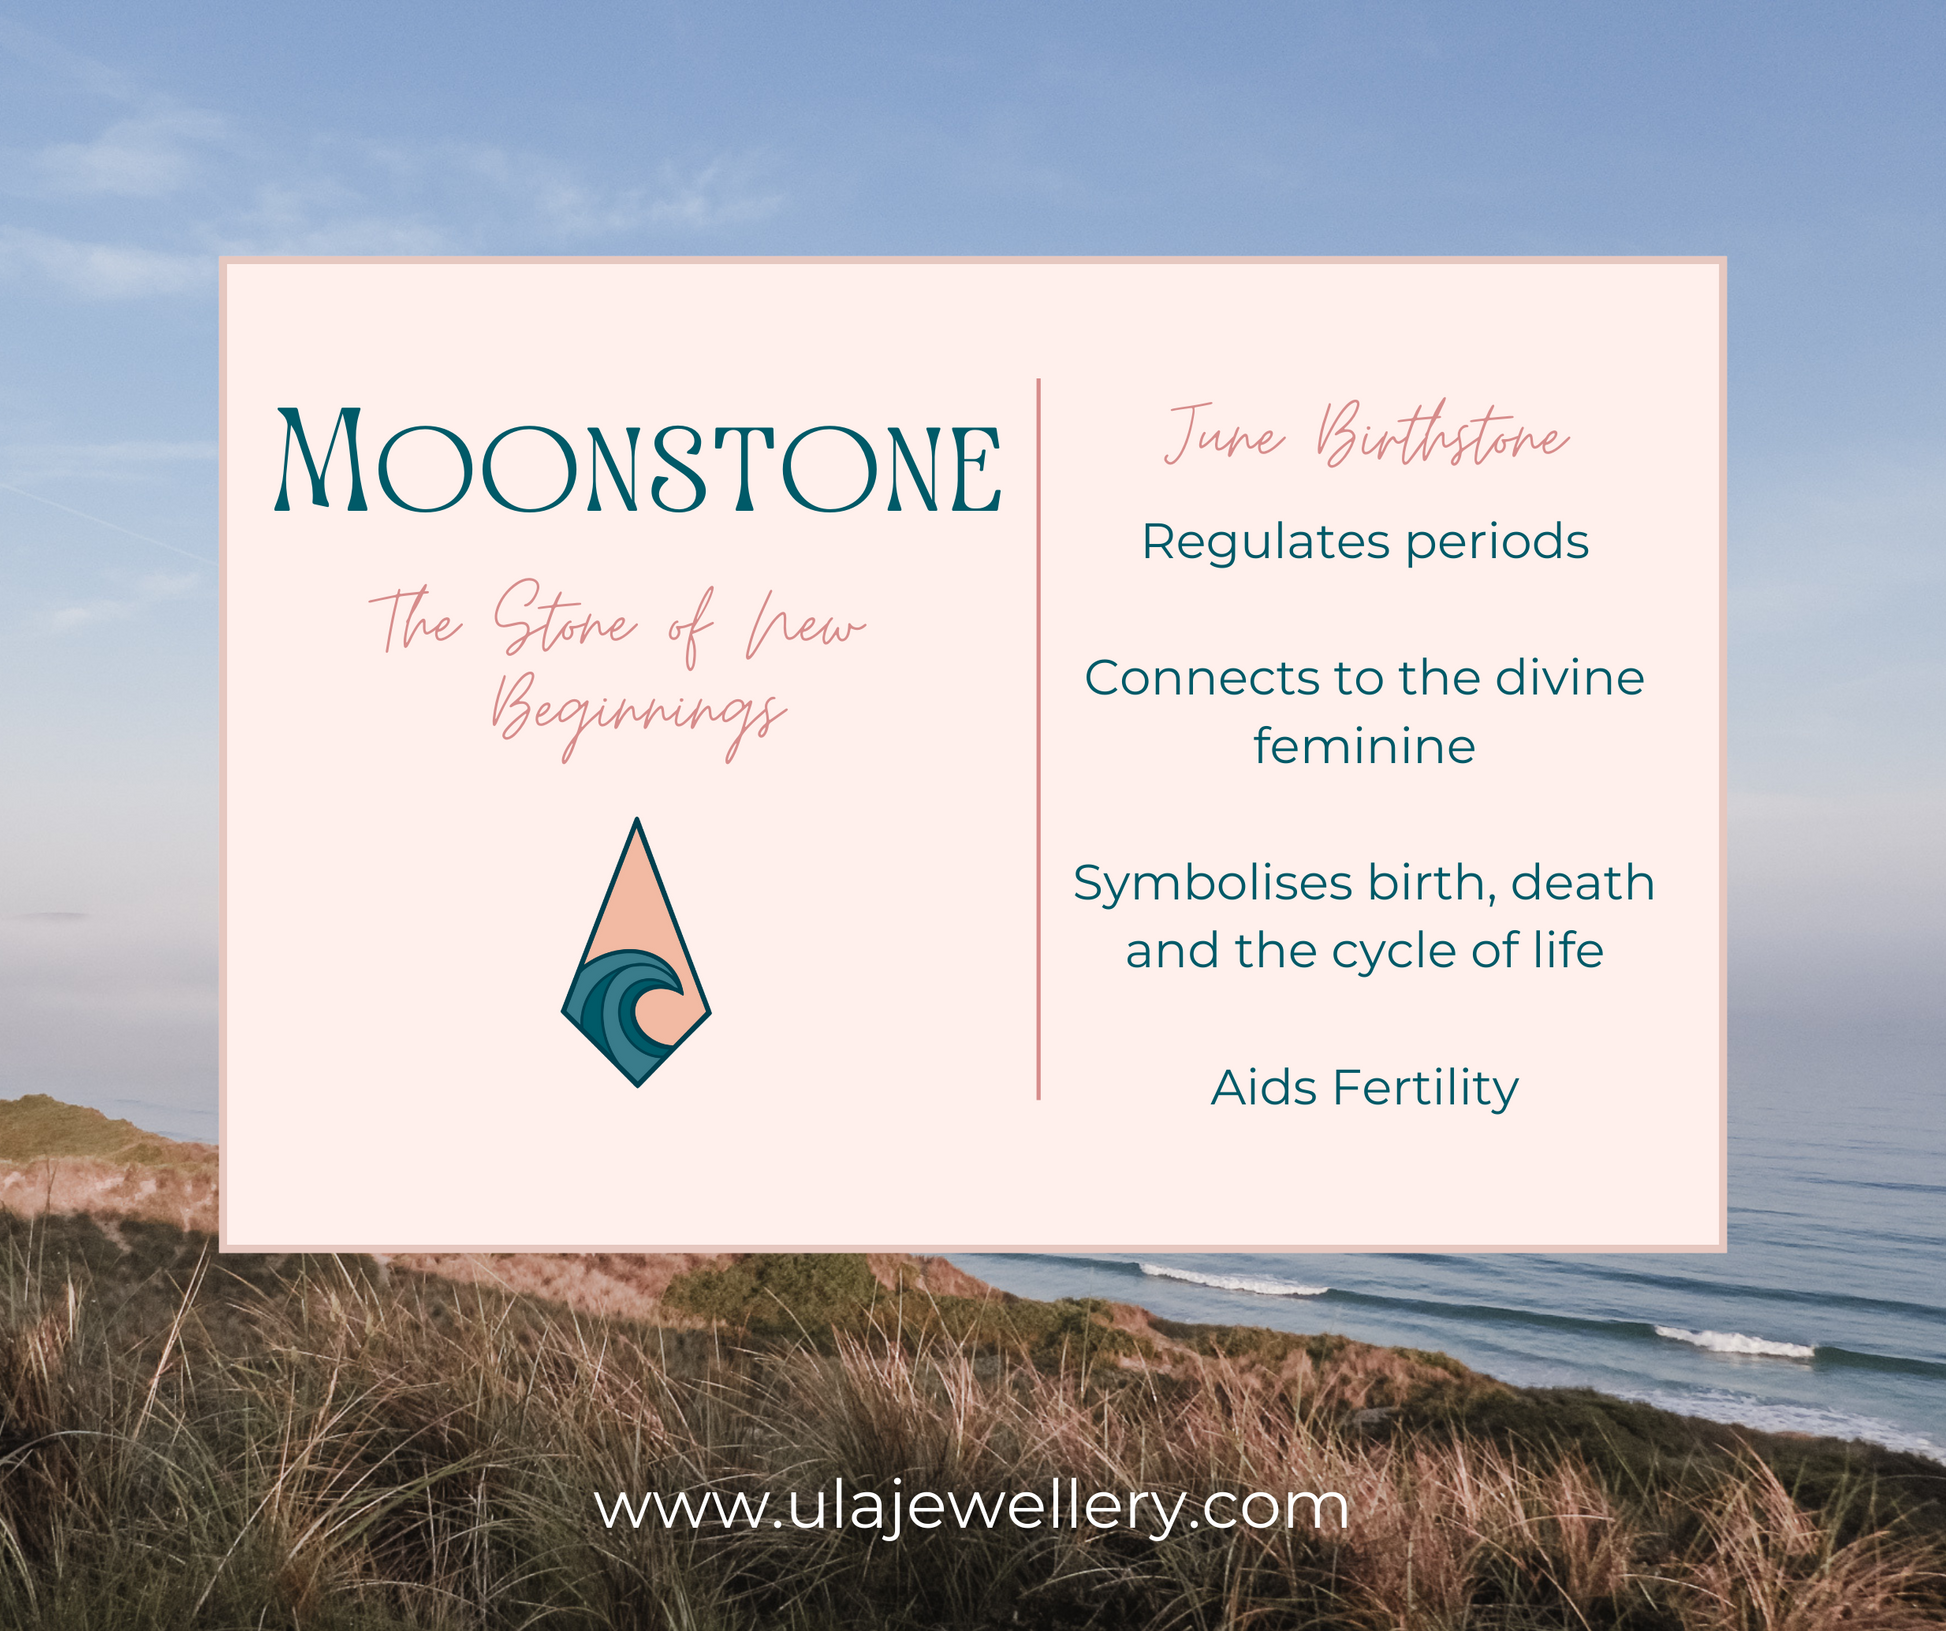 infographic for moonstone gemstone by ula jewellery cornwall